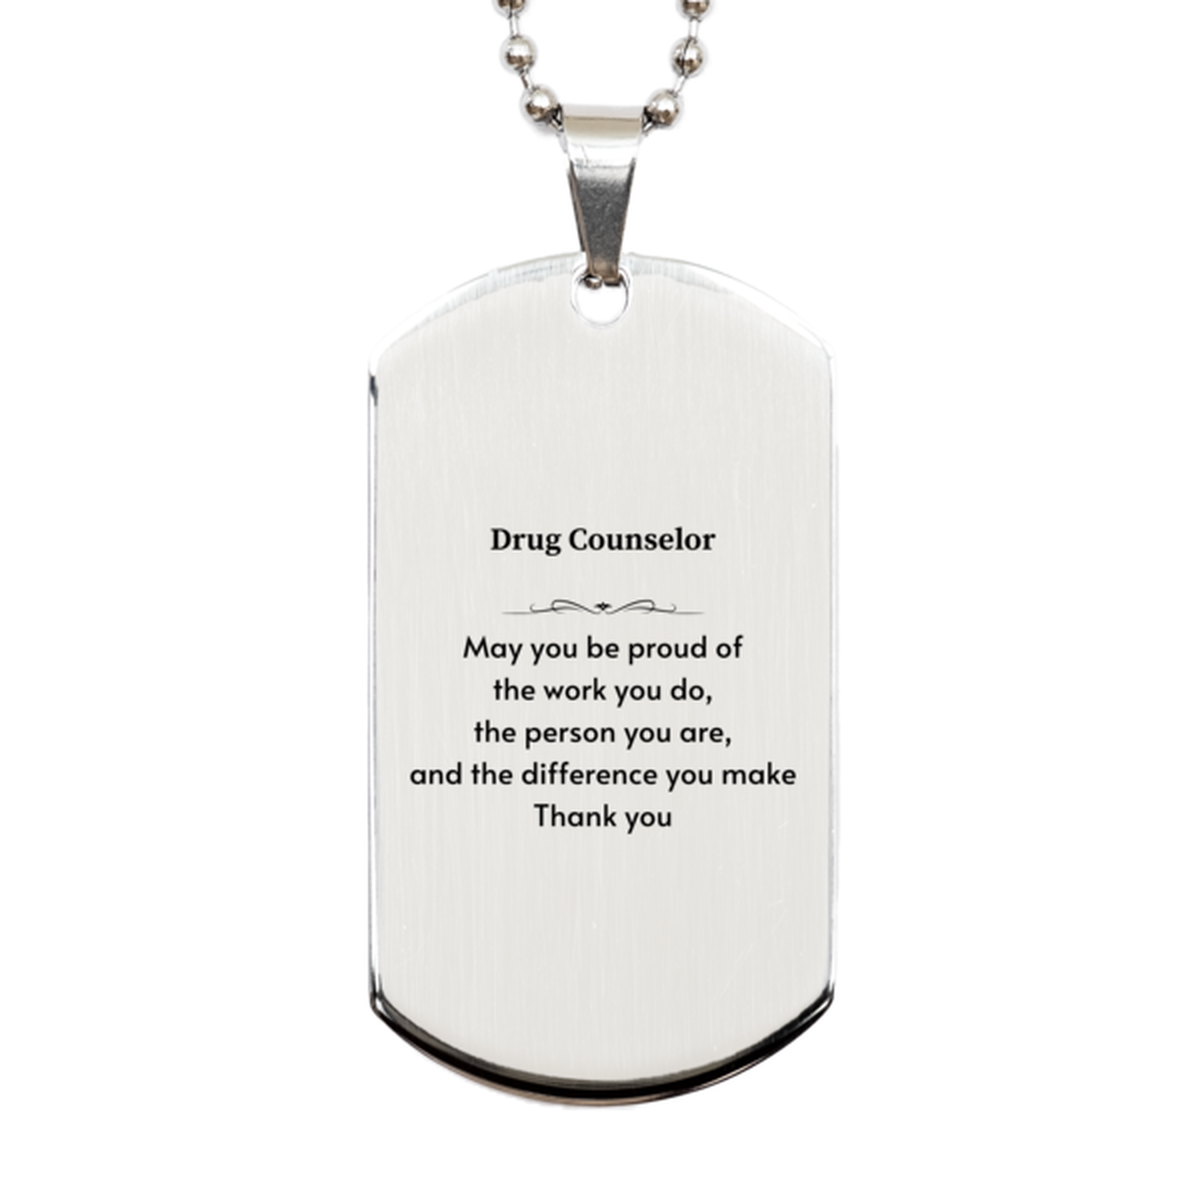 Heartwarming Silver Dog Tag Retirement Coworkers Gifts for Drug Counselor, Drug Counselor May You be proud of the work you do, the person you are Gifts for Boss Men Women Friends